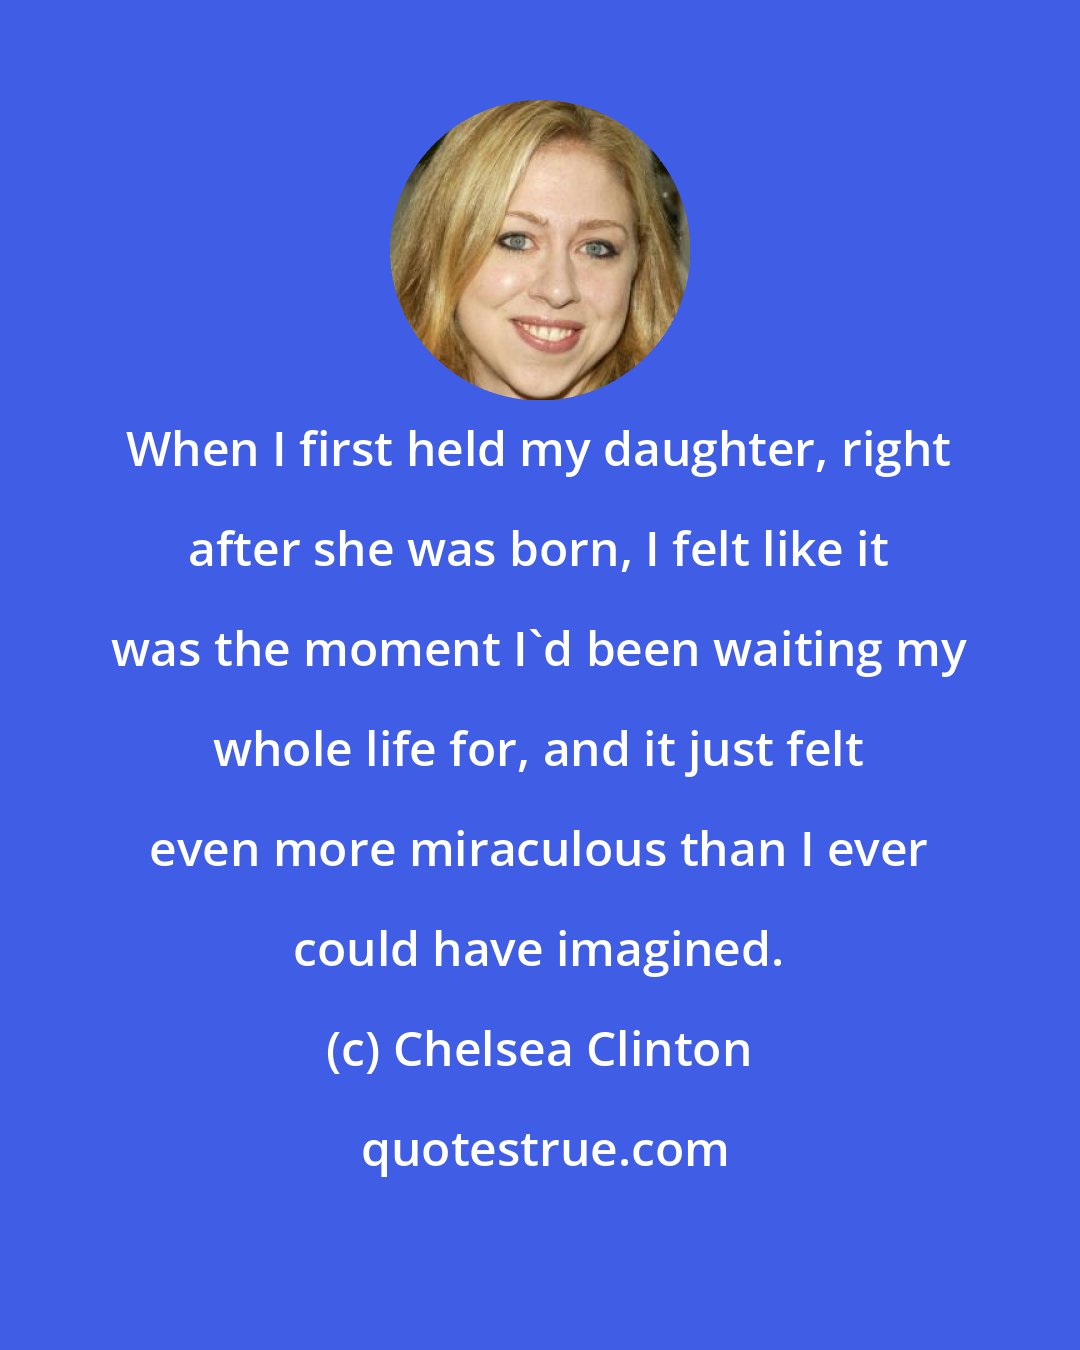 Chelsea Clinton: When I first held my daughter, right after she was born, I felt like it was the moment I'd been waiting my whole life for, and it just felt even more miraculous than I ever could have imagined.